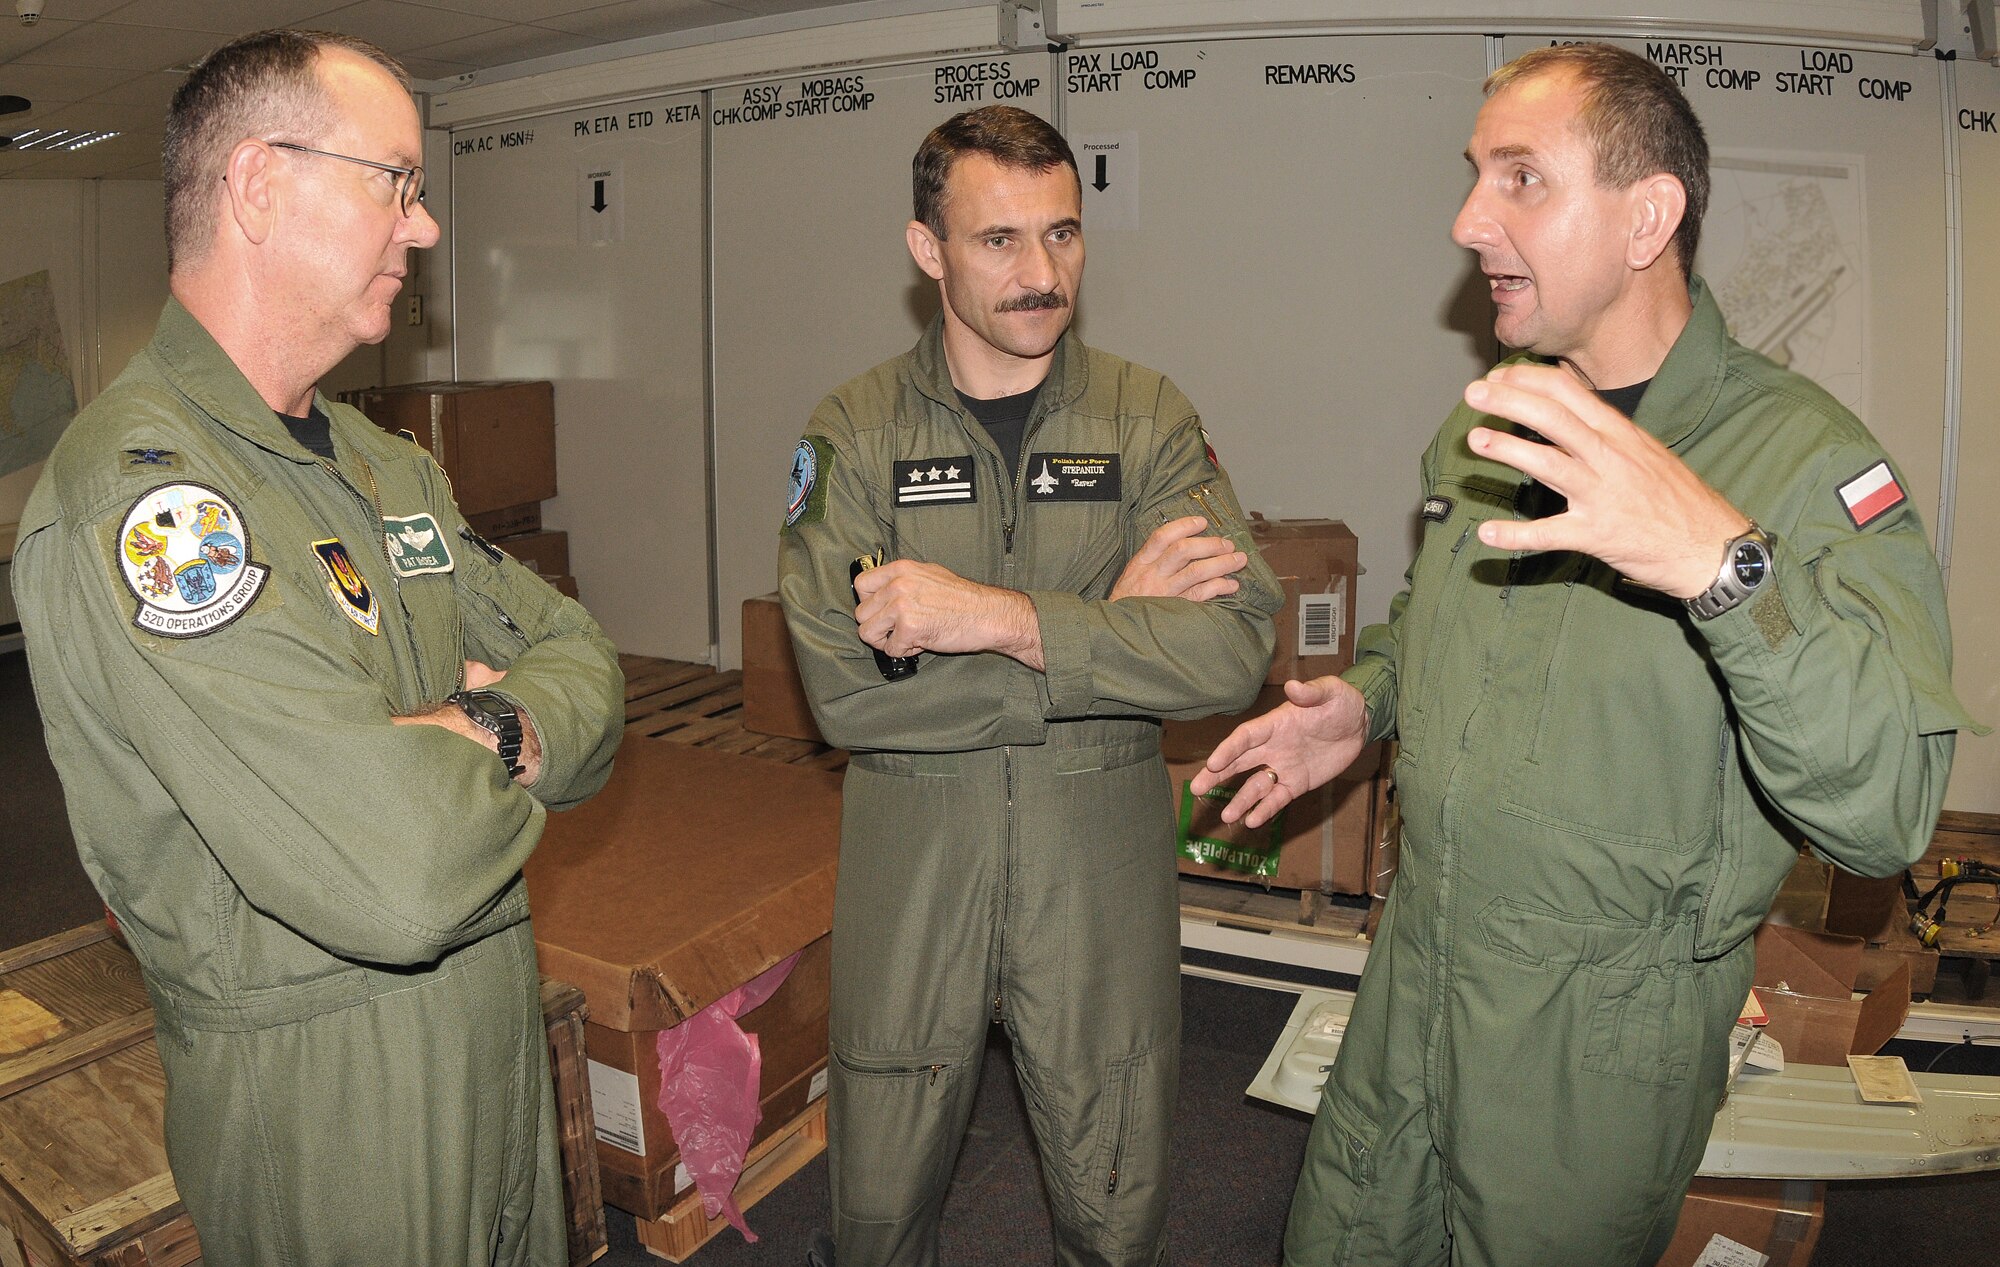 SPANGDAHLEM AIR BASE, Germany - Col. Ryszard Grzelinski (right), deputy chief of the Polish air force, and Col. Rocislaw Stepaniuk (middle), 31st Air Base commander, Krzesiny Air Base, Poland, discuss day-to-day operations of an American fighter squadron with Col. Patrick McCrea (left), 52nd Operations Group commander, during their visit to Spangdahlem Air Base July 29. Four Polish air force members visited Spangdahlem to observe the daily routine and operations tempo of an American F-16 Fighting Falcon squadron and an American Air Base. (U.S. Air Force photo by Airman 1st Class Nick Wilson)